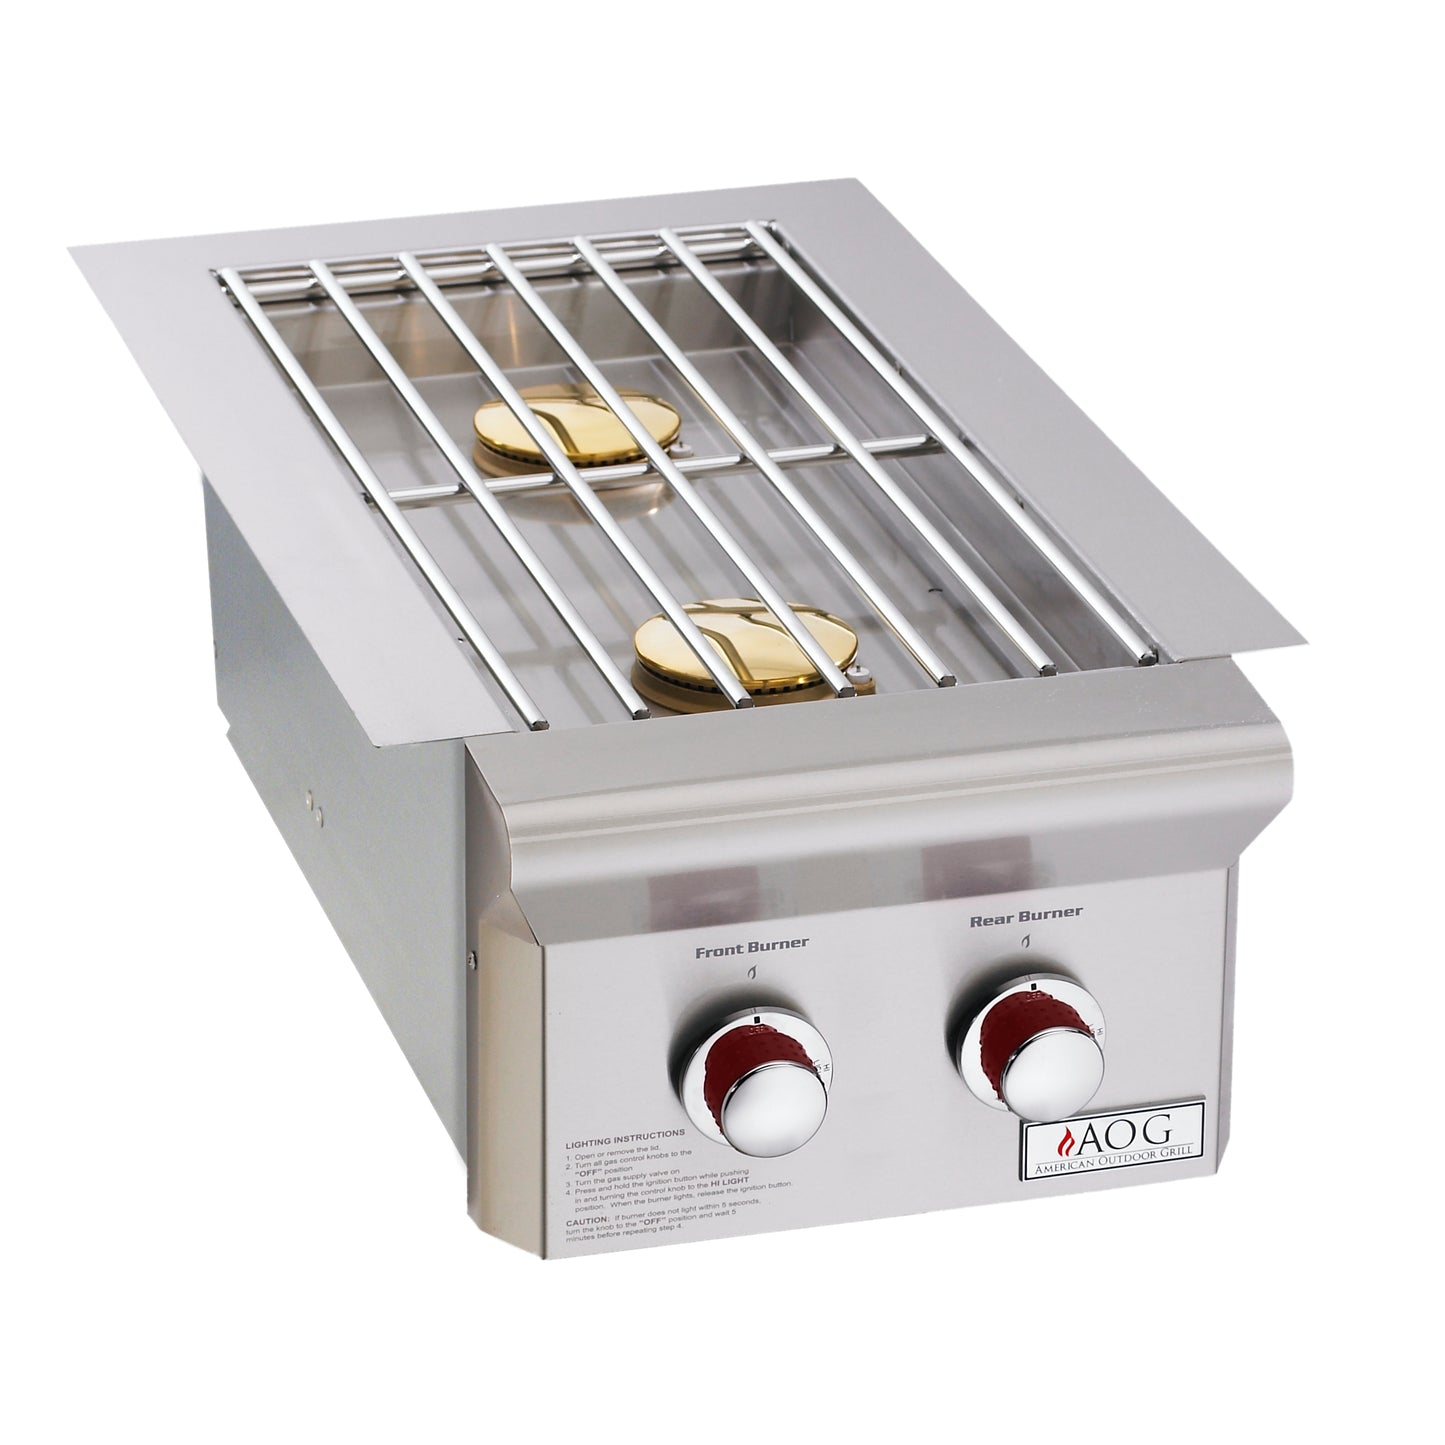 American Outdoor Grill (AOG) Built-In Double Side Burner 25,000 BTU’s (“T” Series) 3282T